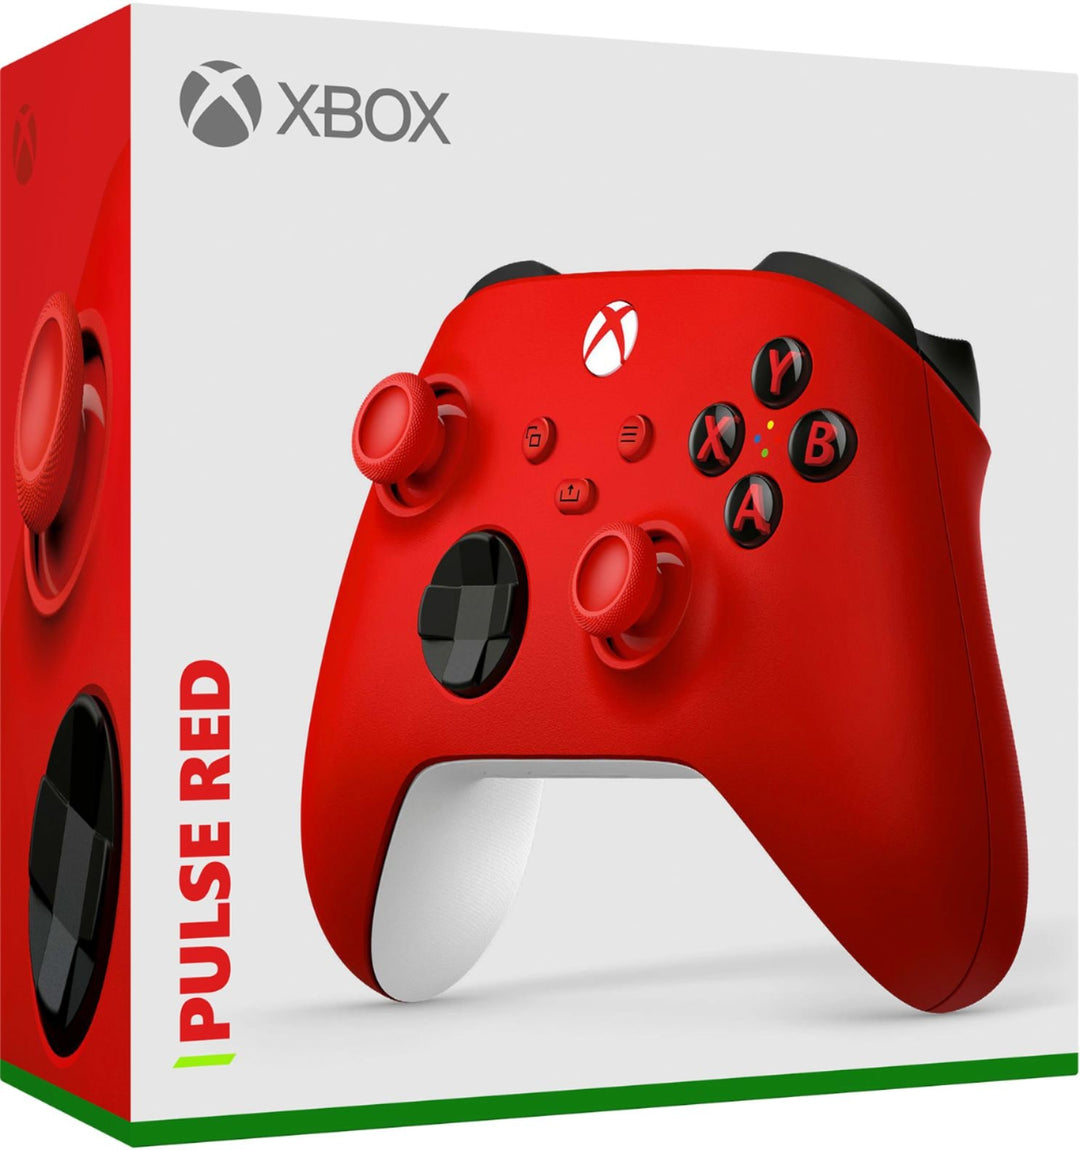 Microsoft - Xbox Wireless Controller for Xbox Series X, Xbox Series S, Xbox One, Windows Devices - Pulse Red_3